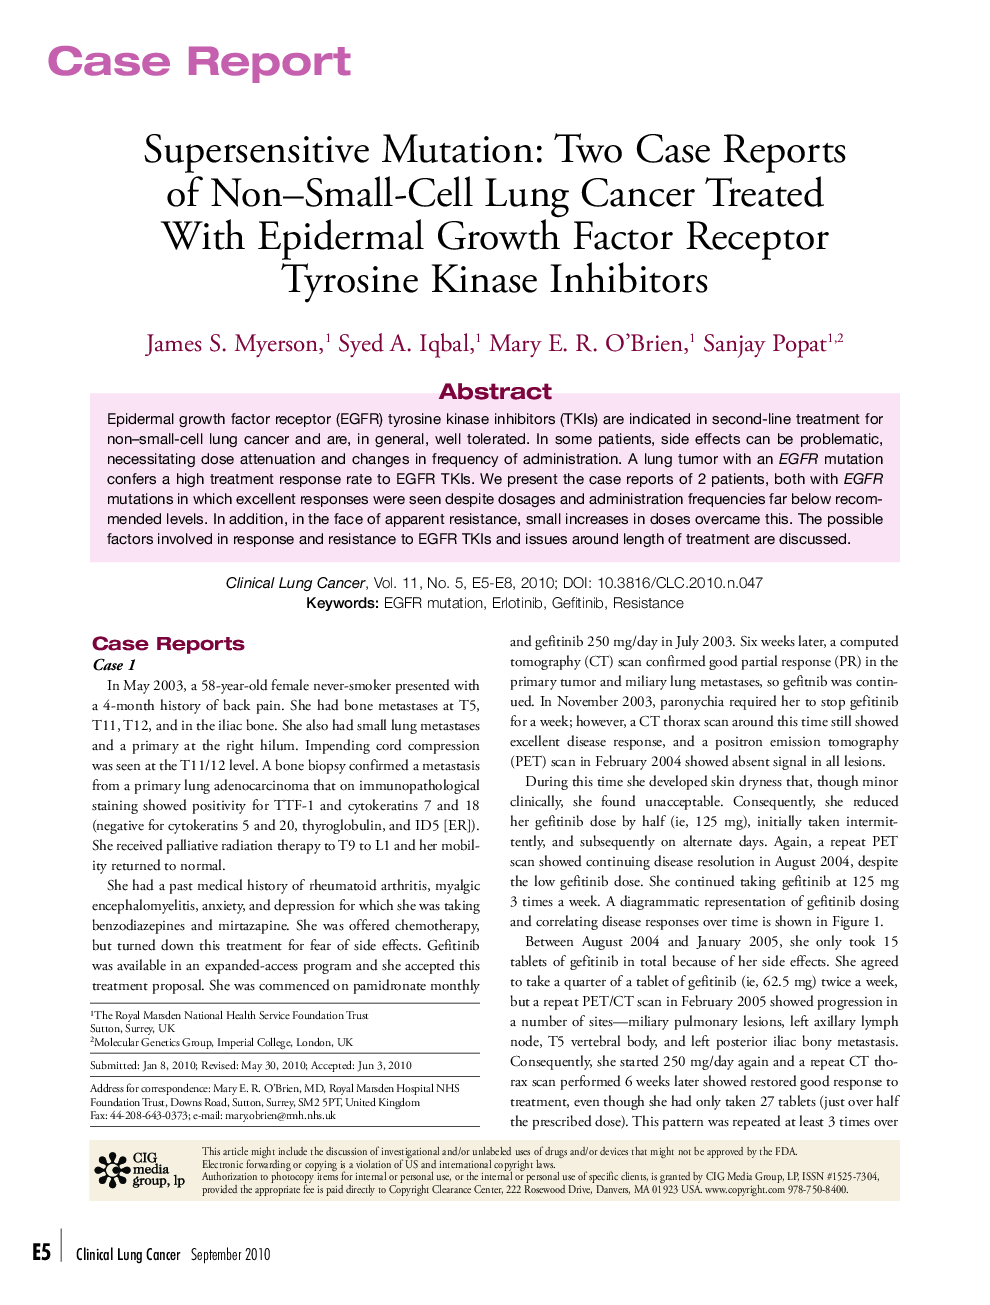 Supersensitive Mutation: Two Case Reports of Non–Small-Cell Lung Cancer Treated With Epidermal Growth Factor Receptor Tyrosine Kinase Inhibitors 